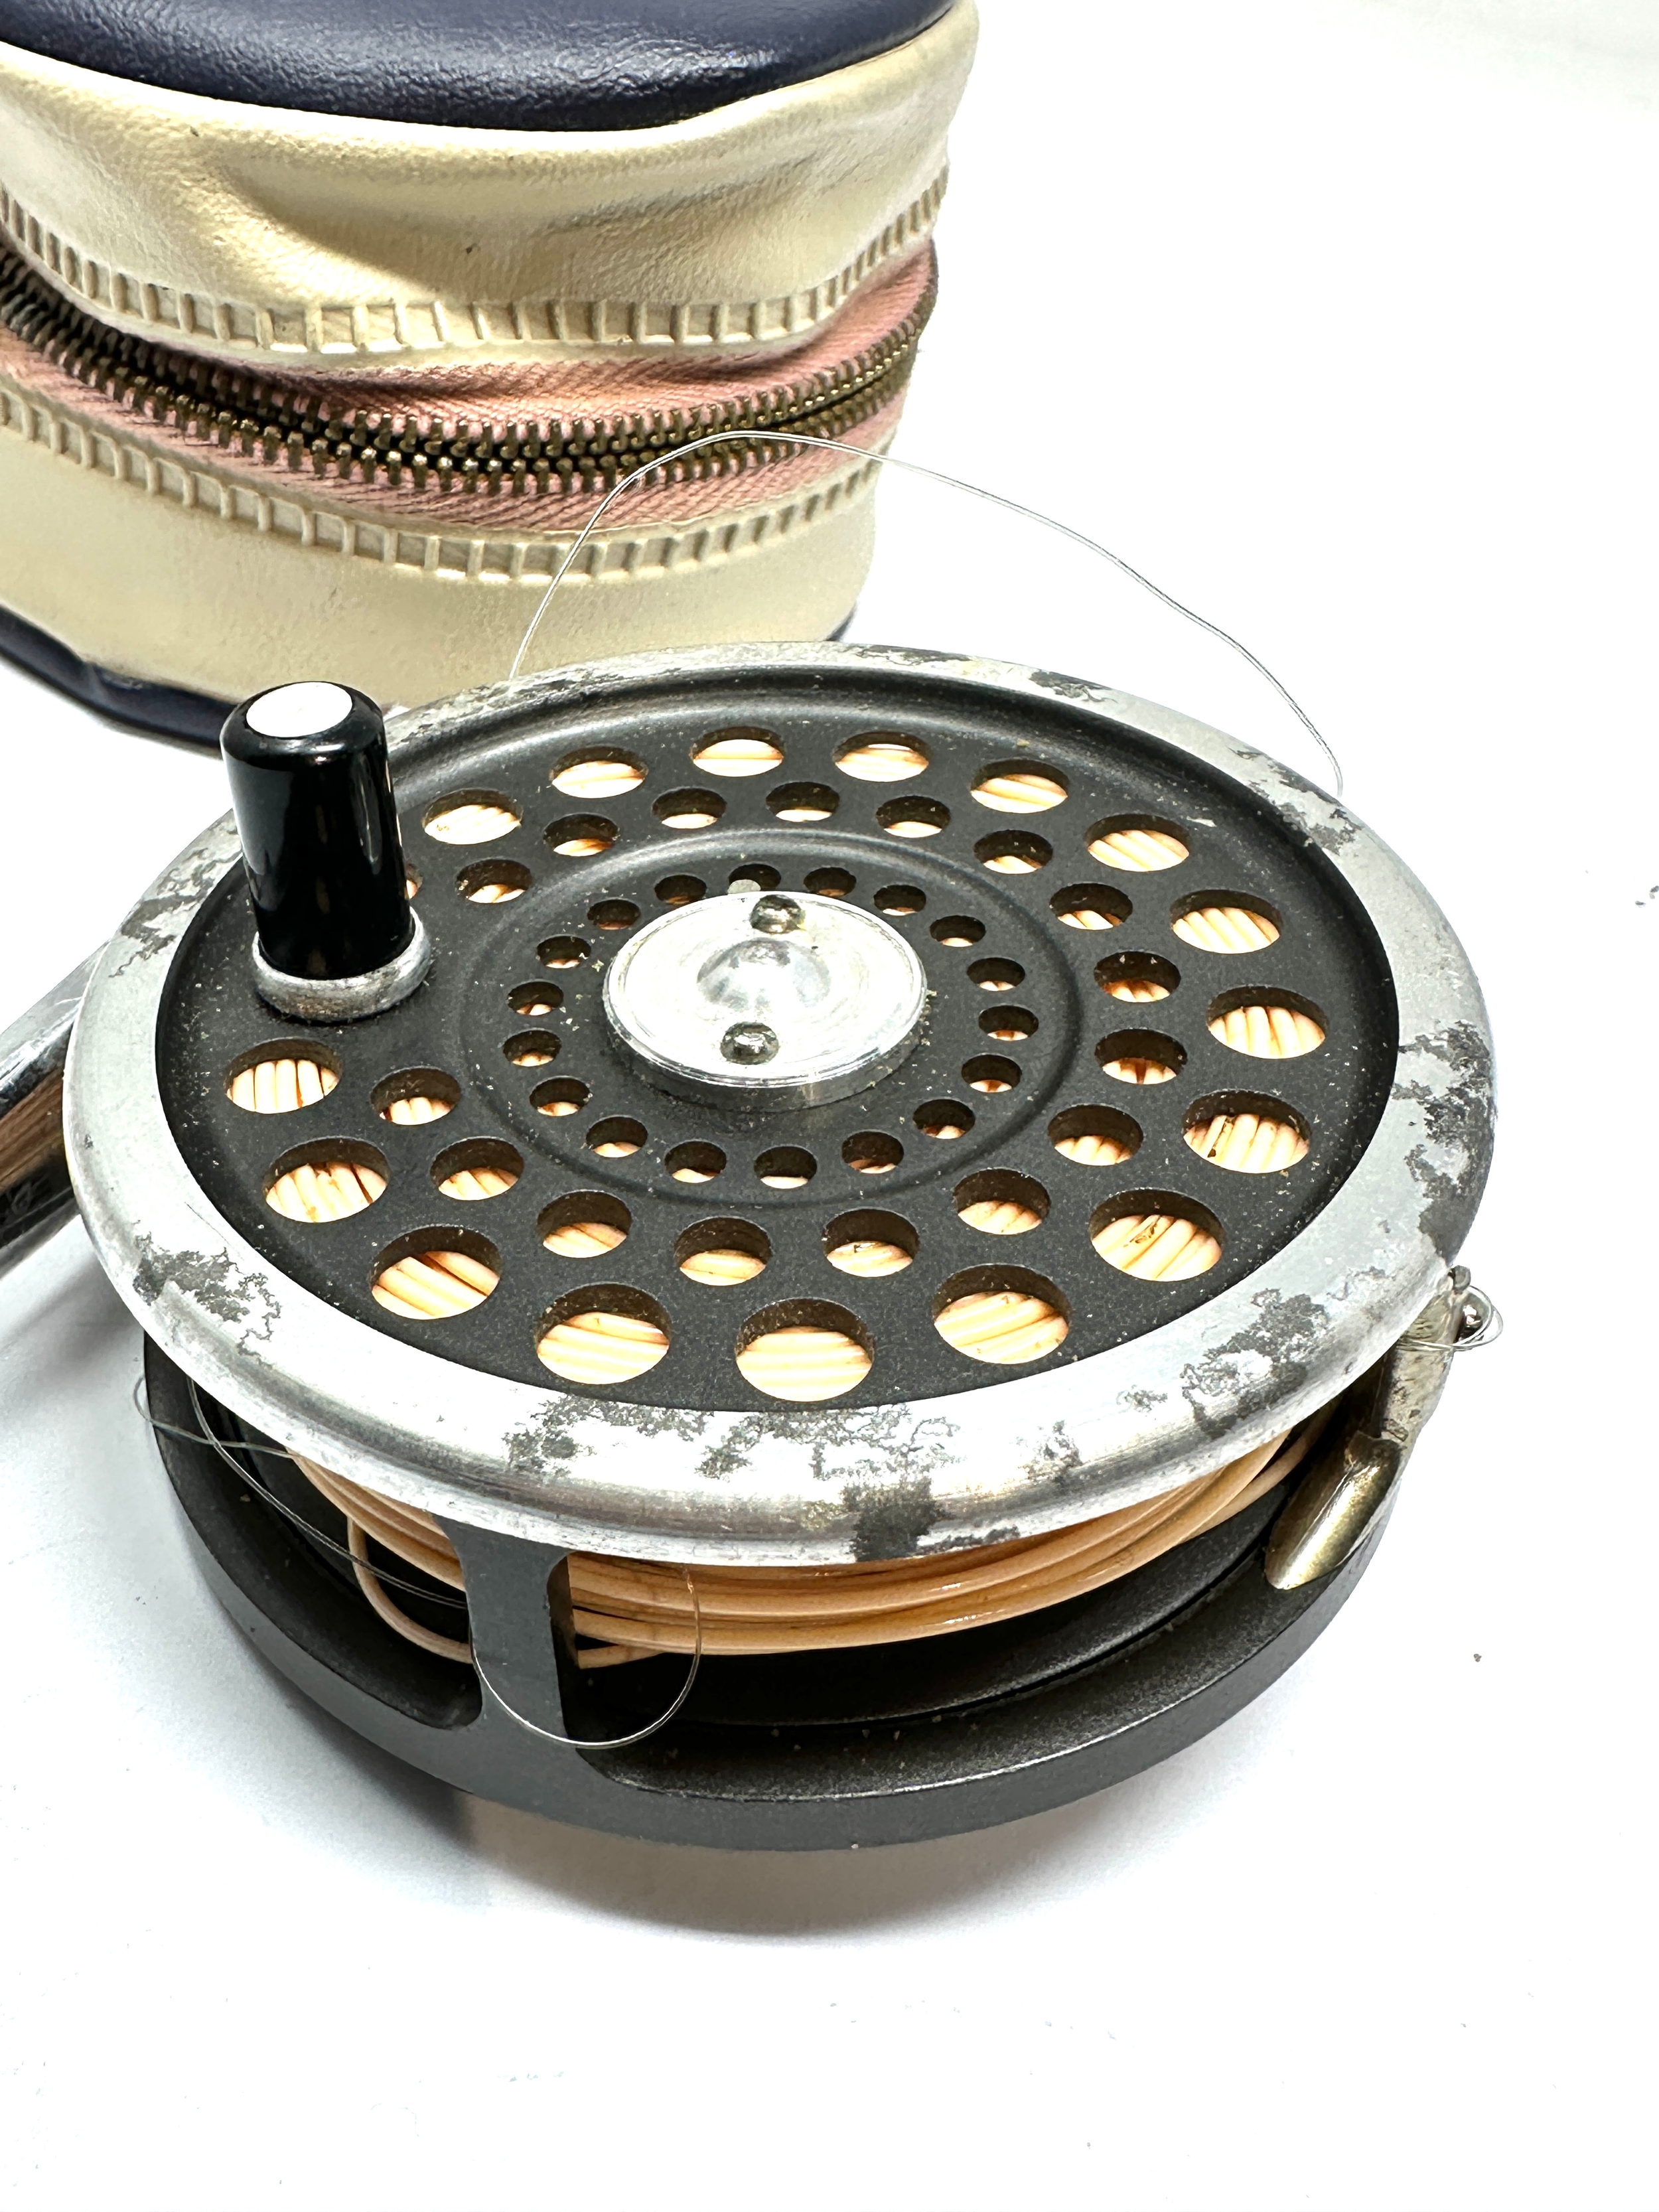 Vintage Hardy Marquis Number 5 Trout Fly Reel with hardy brothers Zipped Case - Image 3 of 4